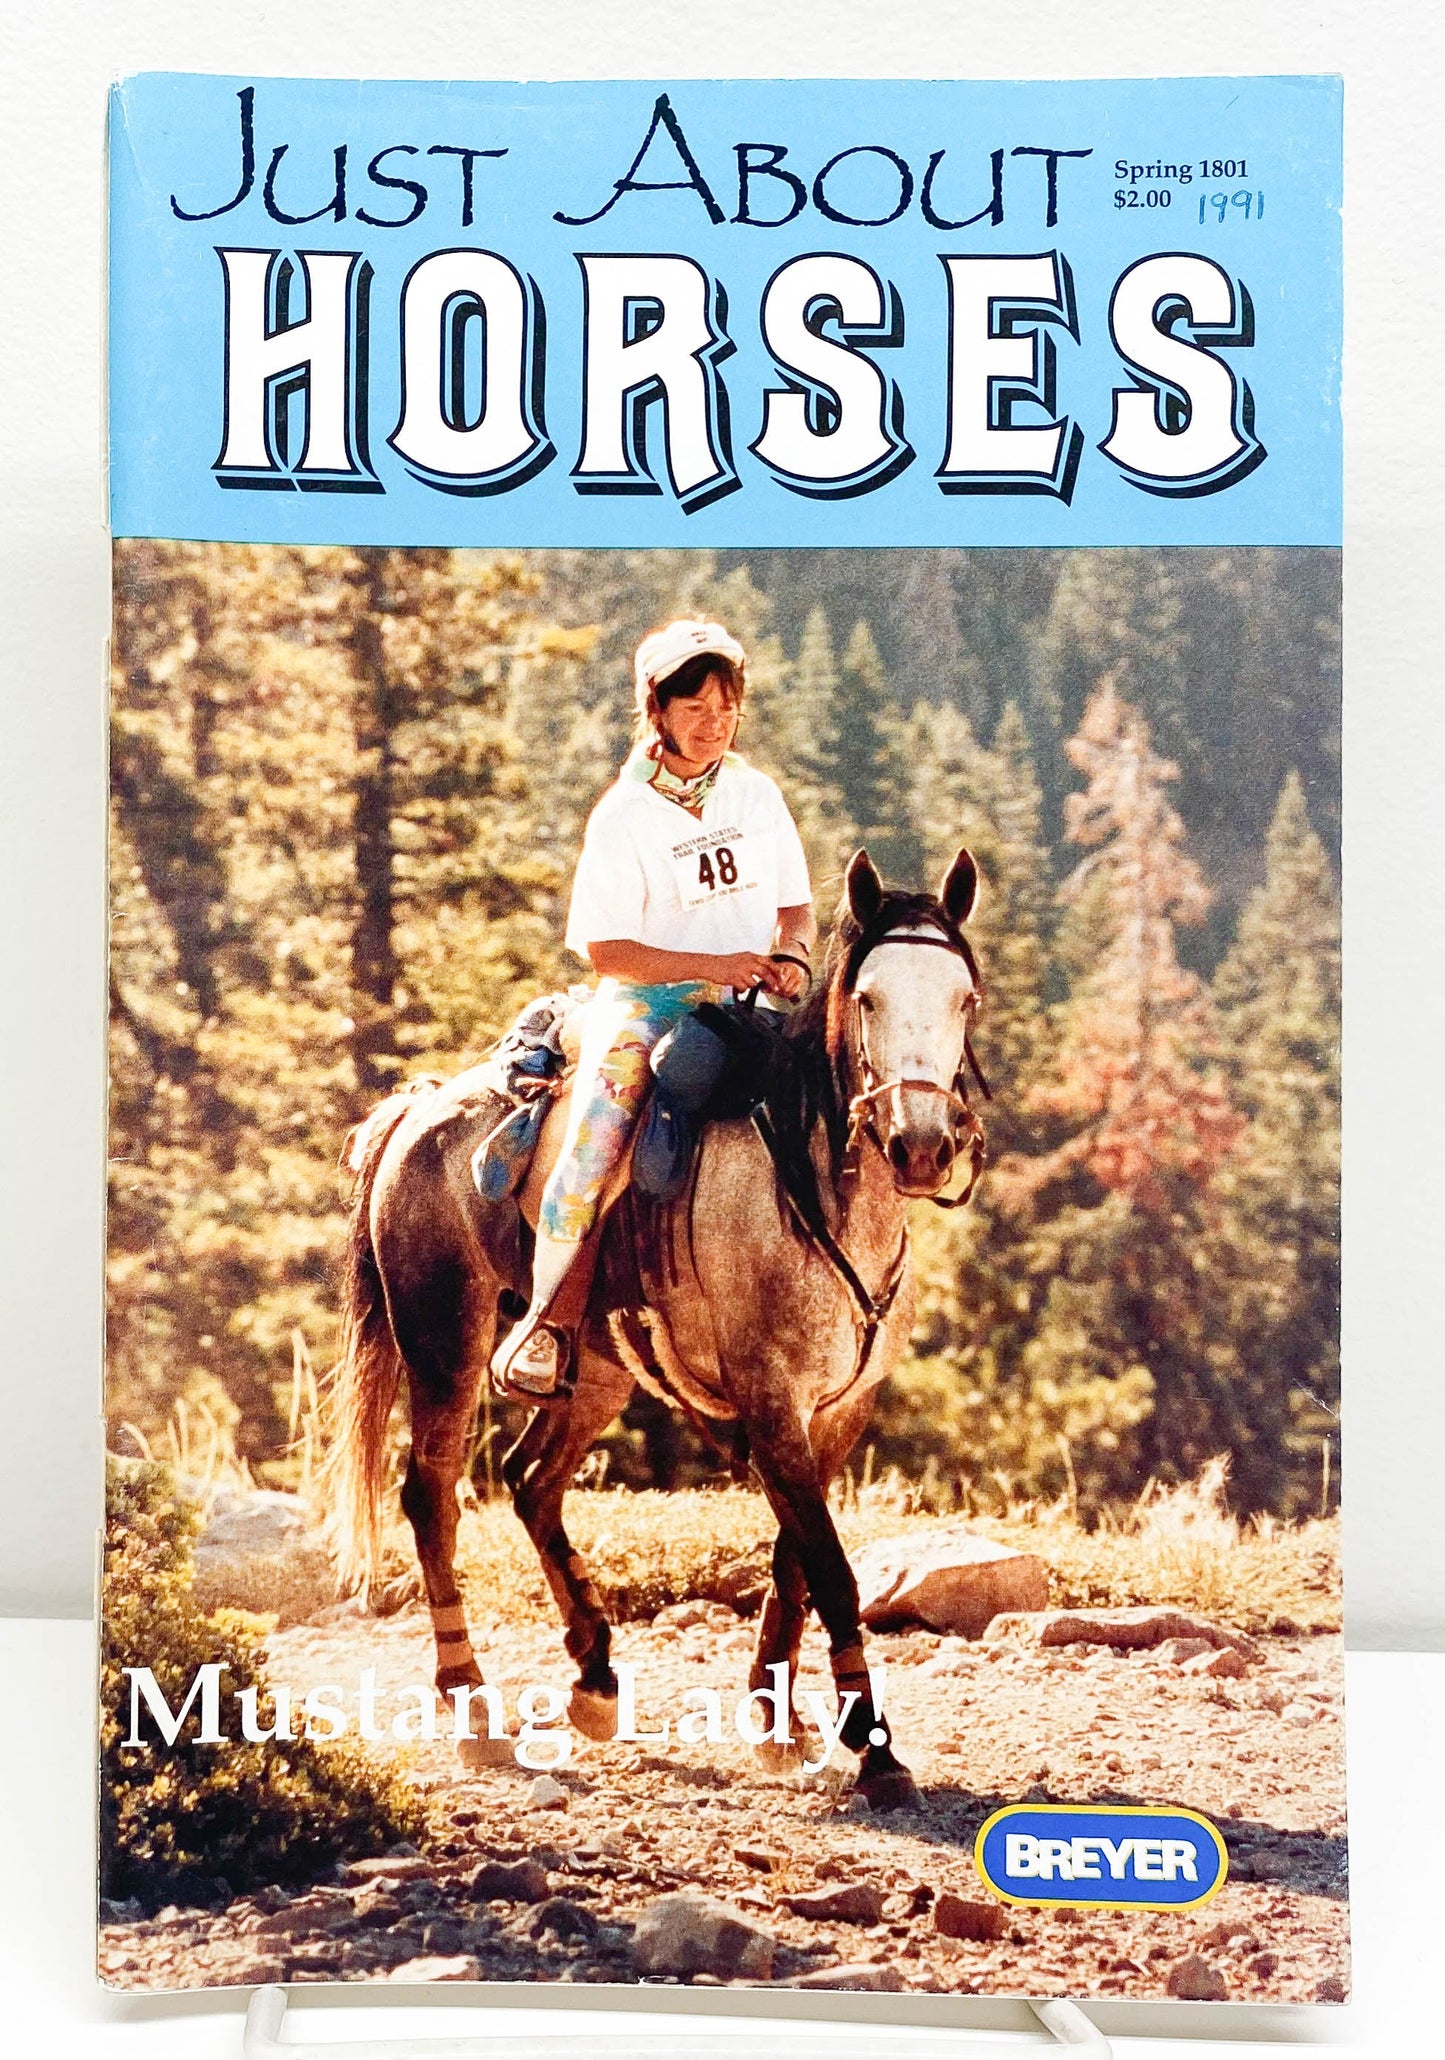 Just About Horses Magazine Vol. 18 No. 1, 1991, Spring